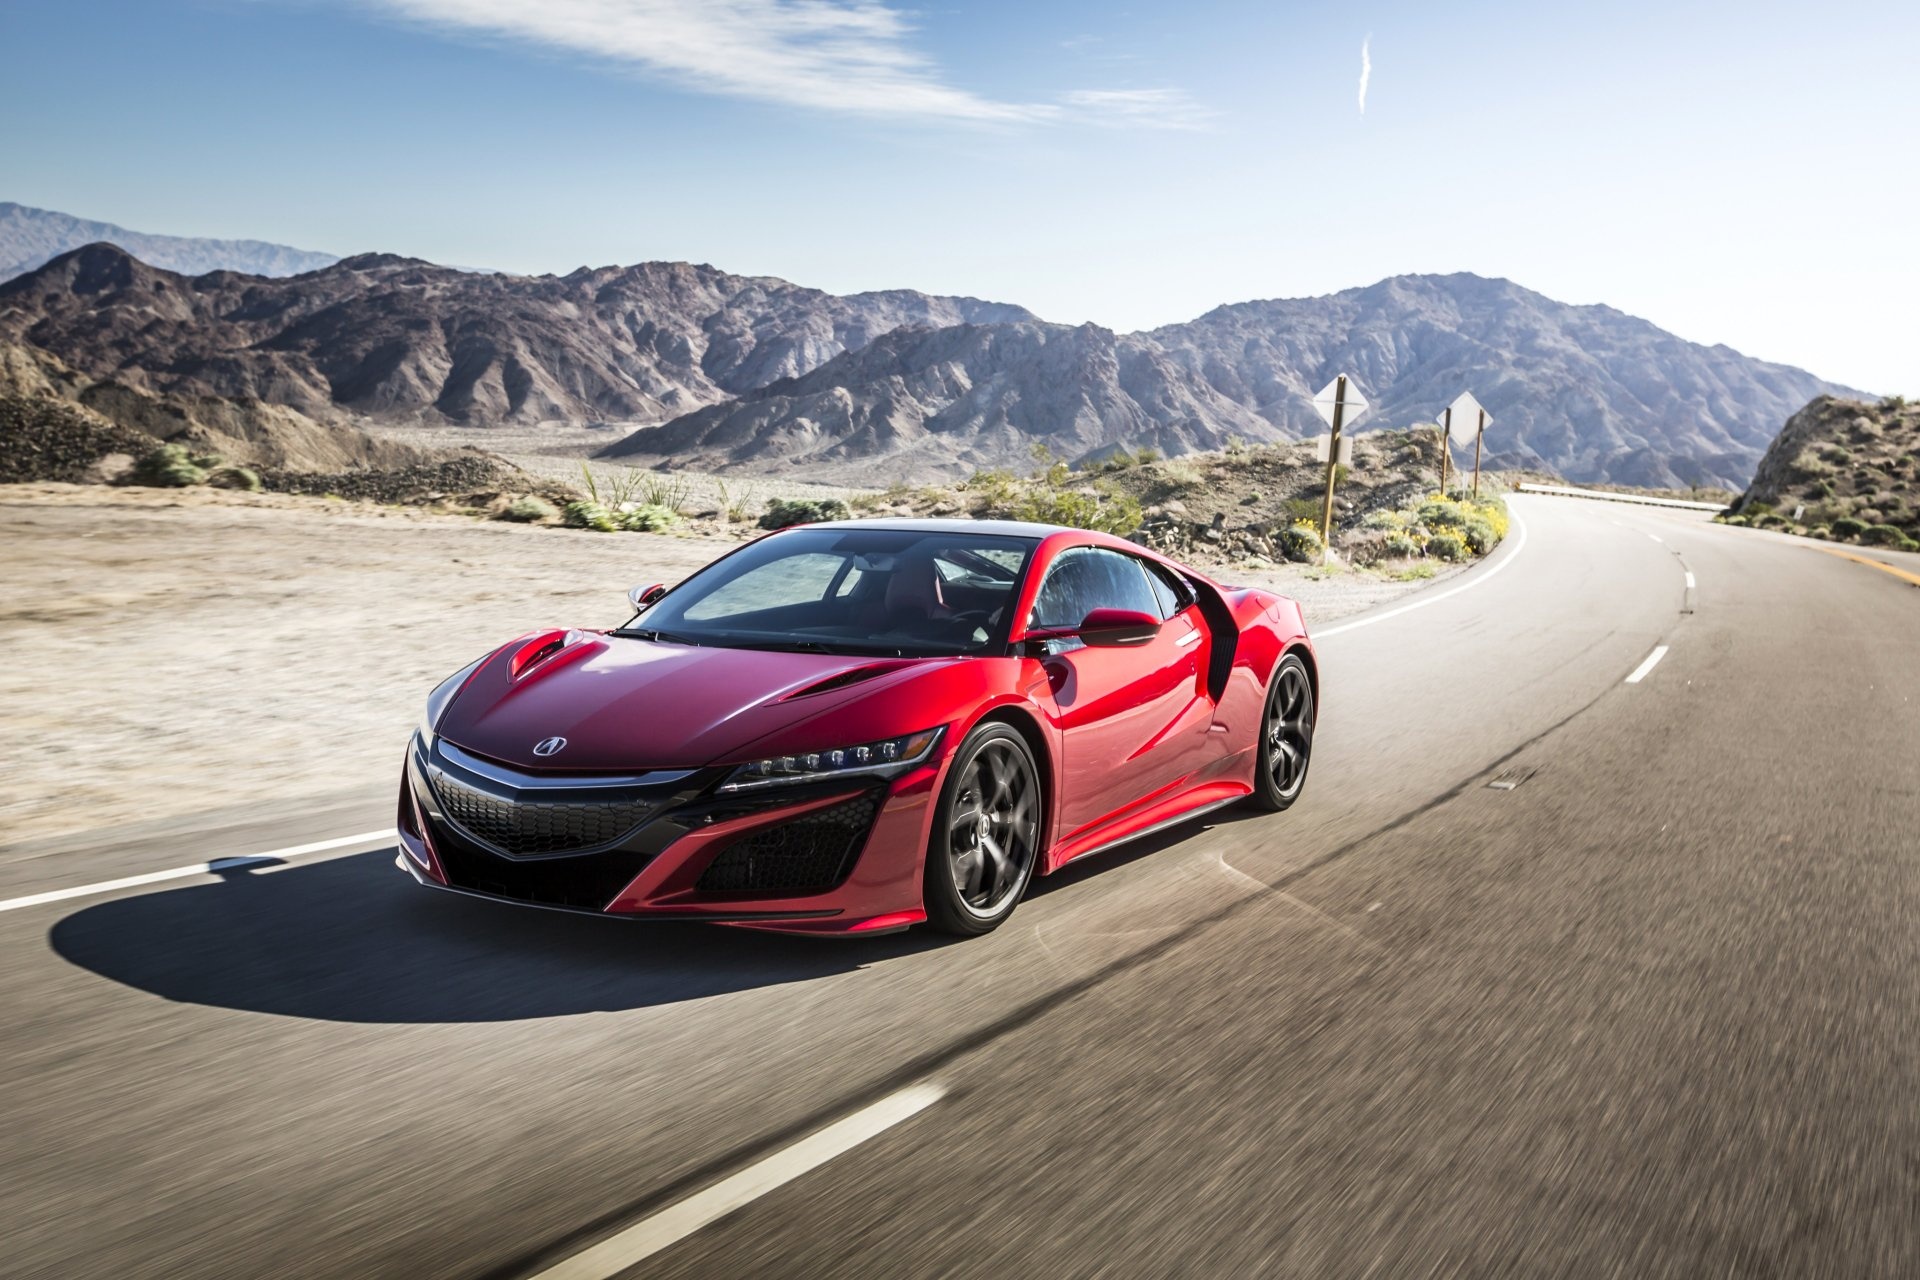 Acura NSX, 4K wallpapers, Luxury sports car, High-definition backgrounds, 1920x1280 HD Desktop